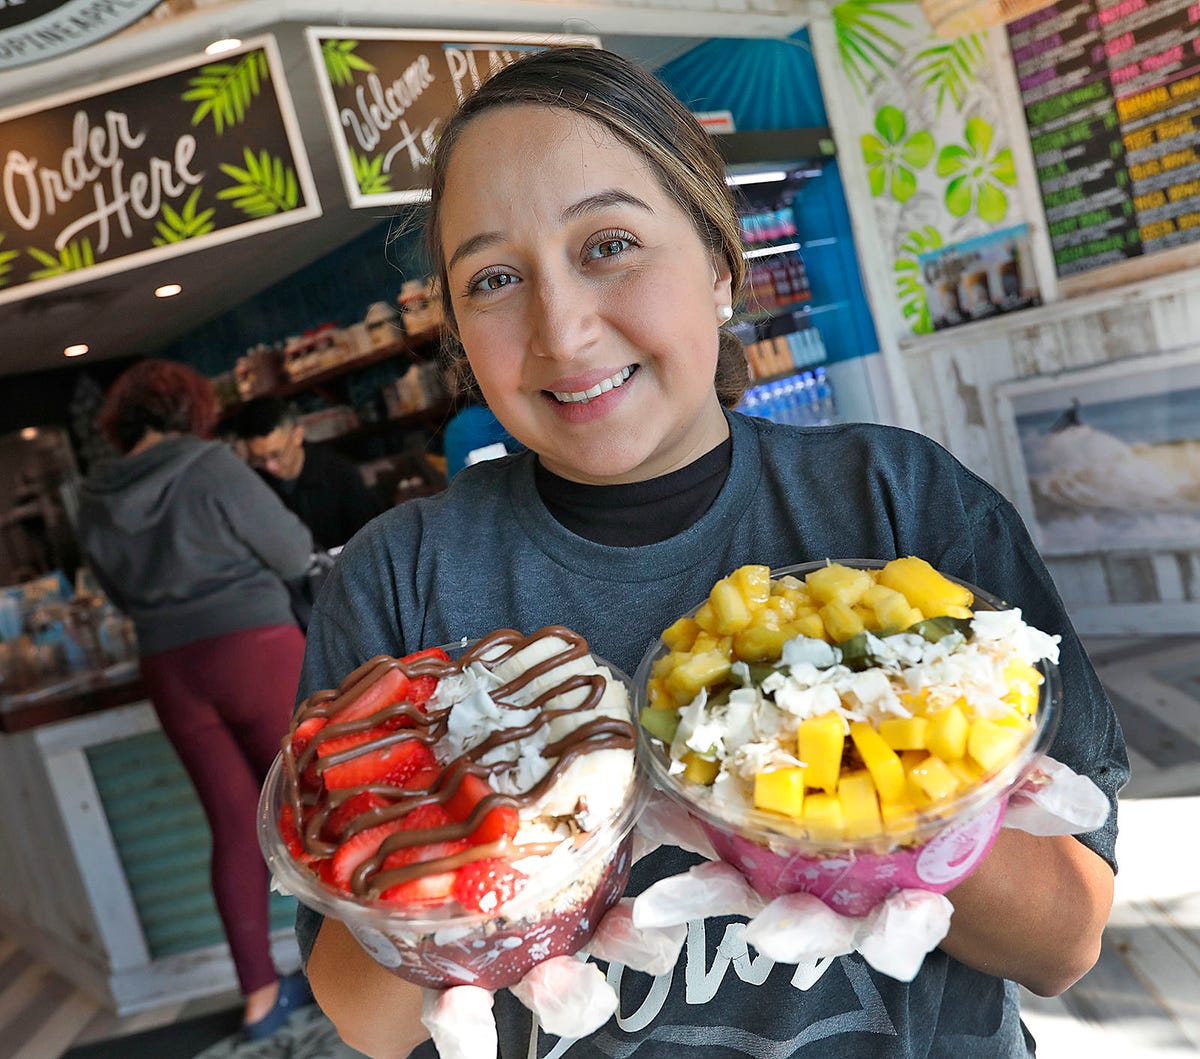 Superfood smoothie shop Playa Bowls opens in East Milton Square